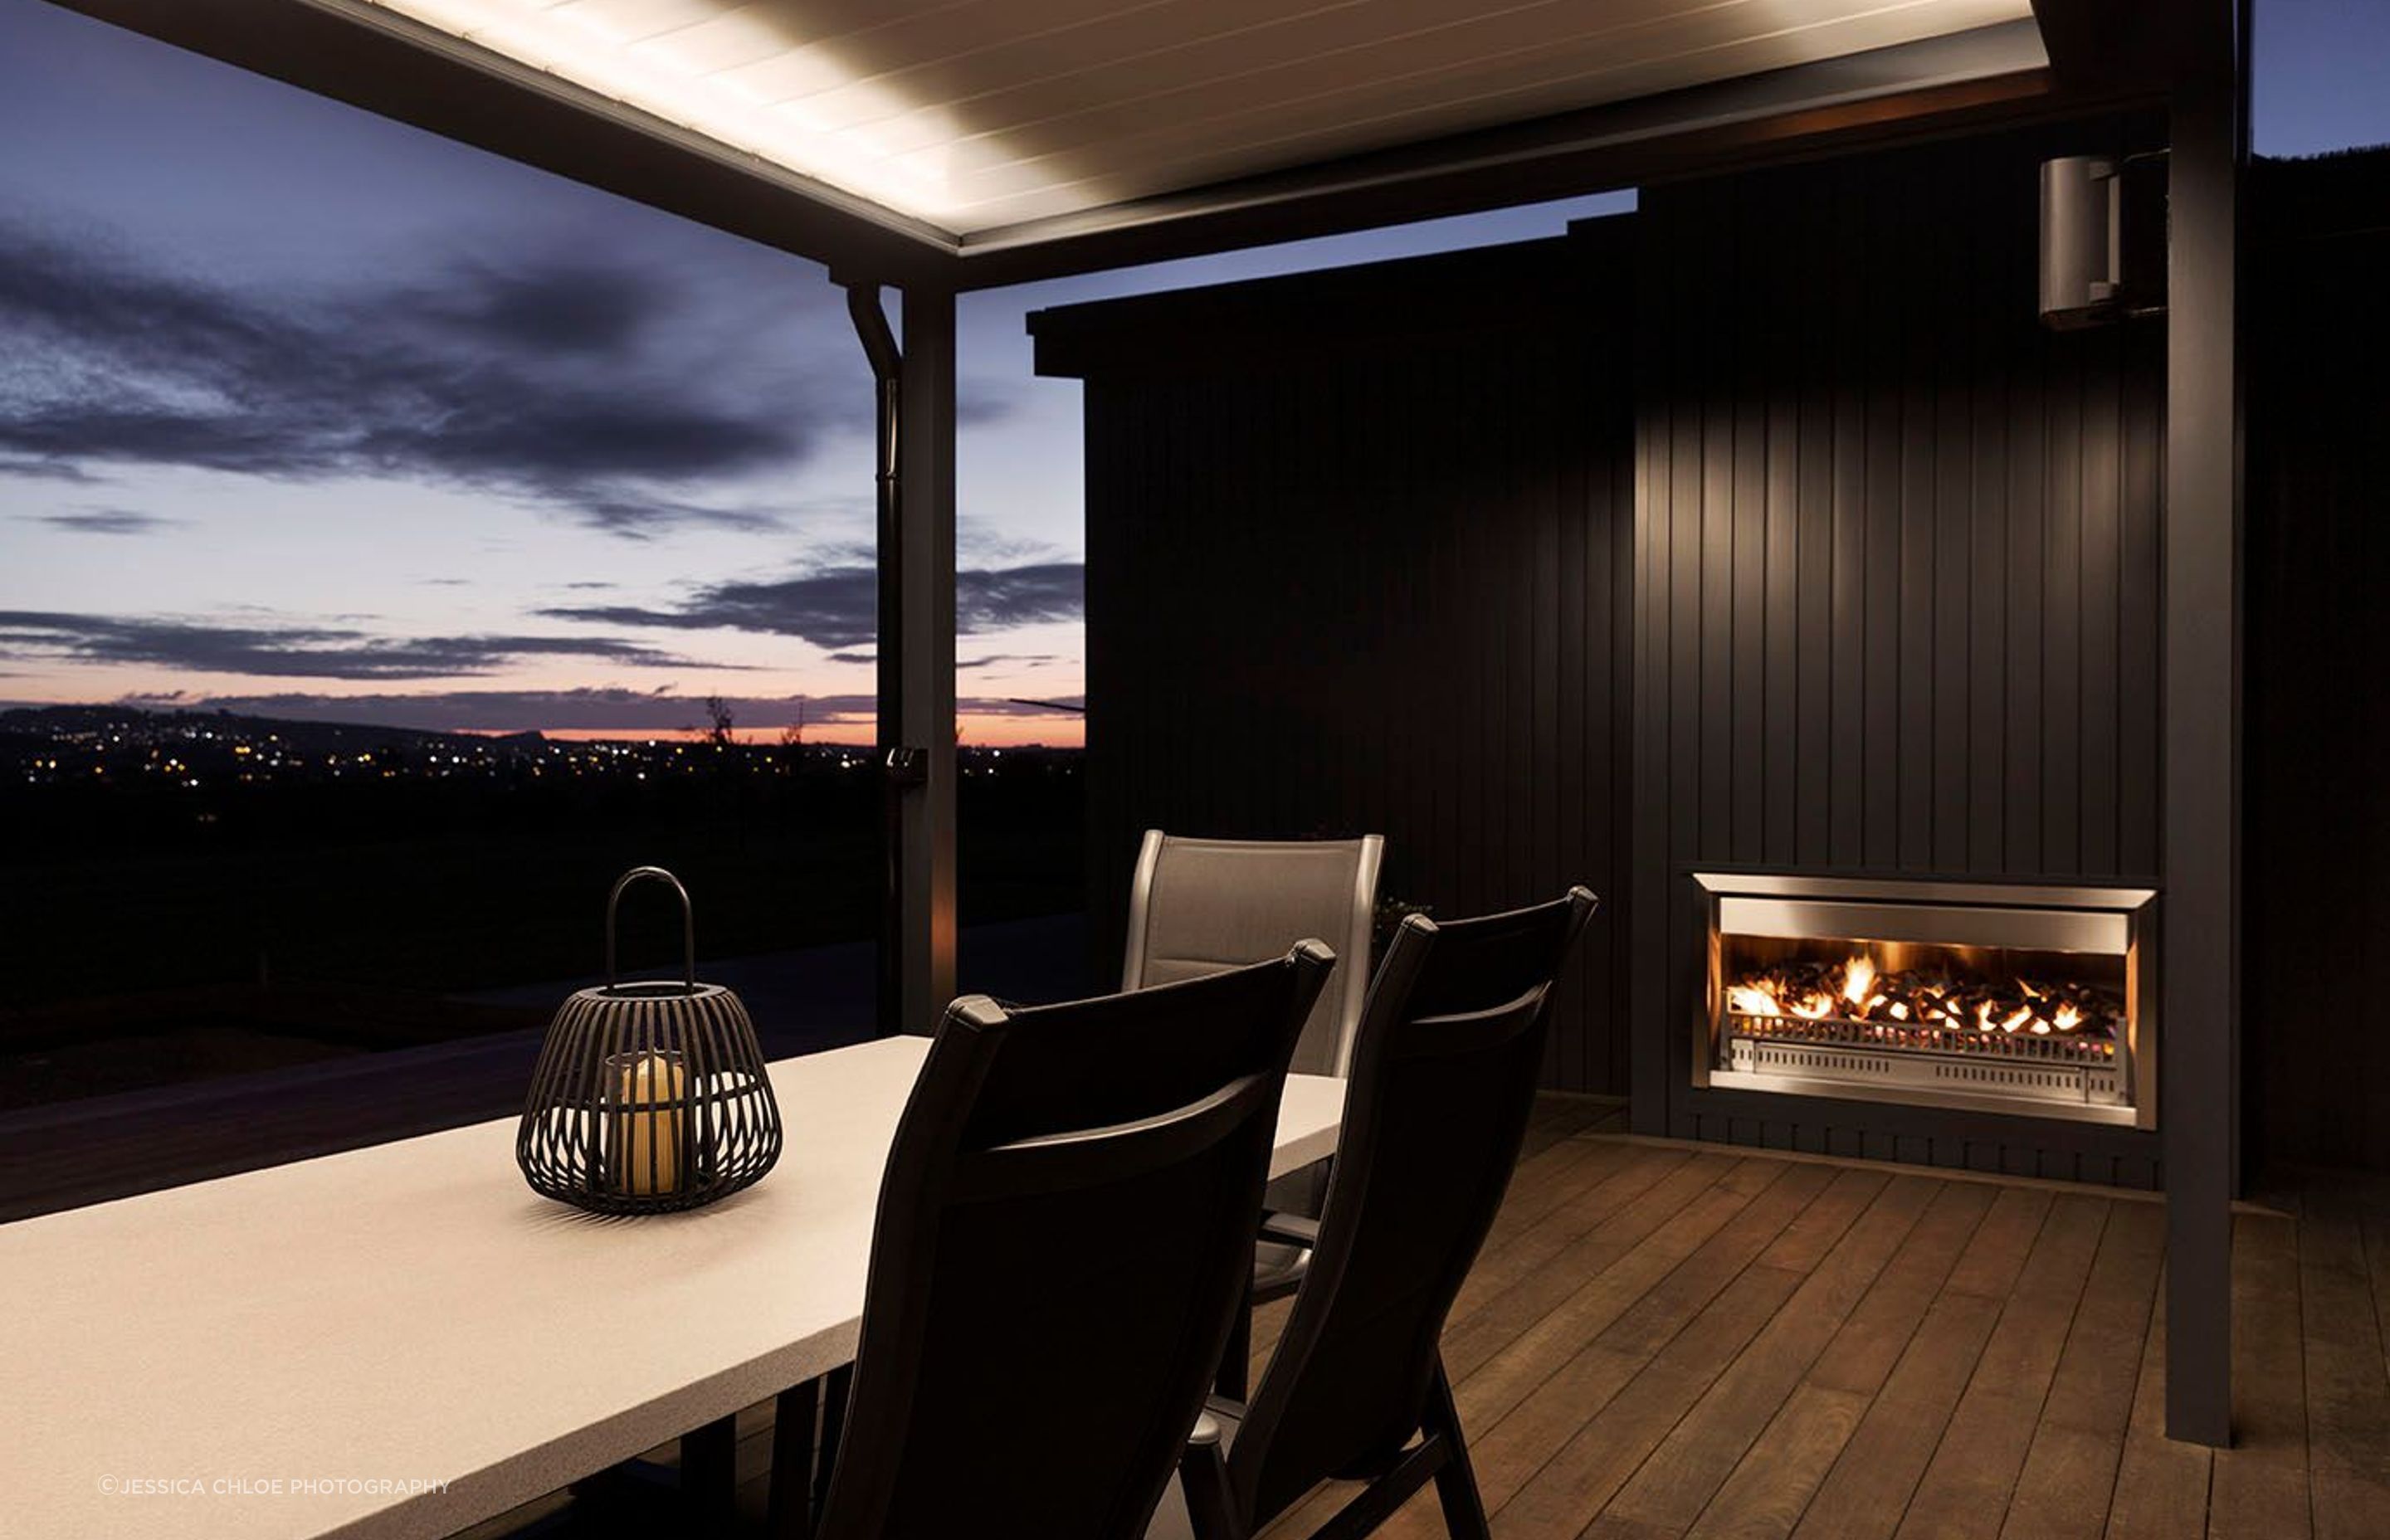 Fireside sunsets in the rear entertainment area